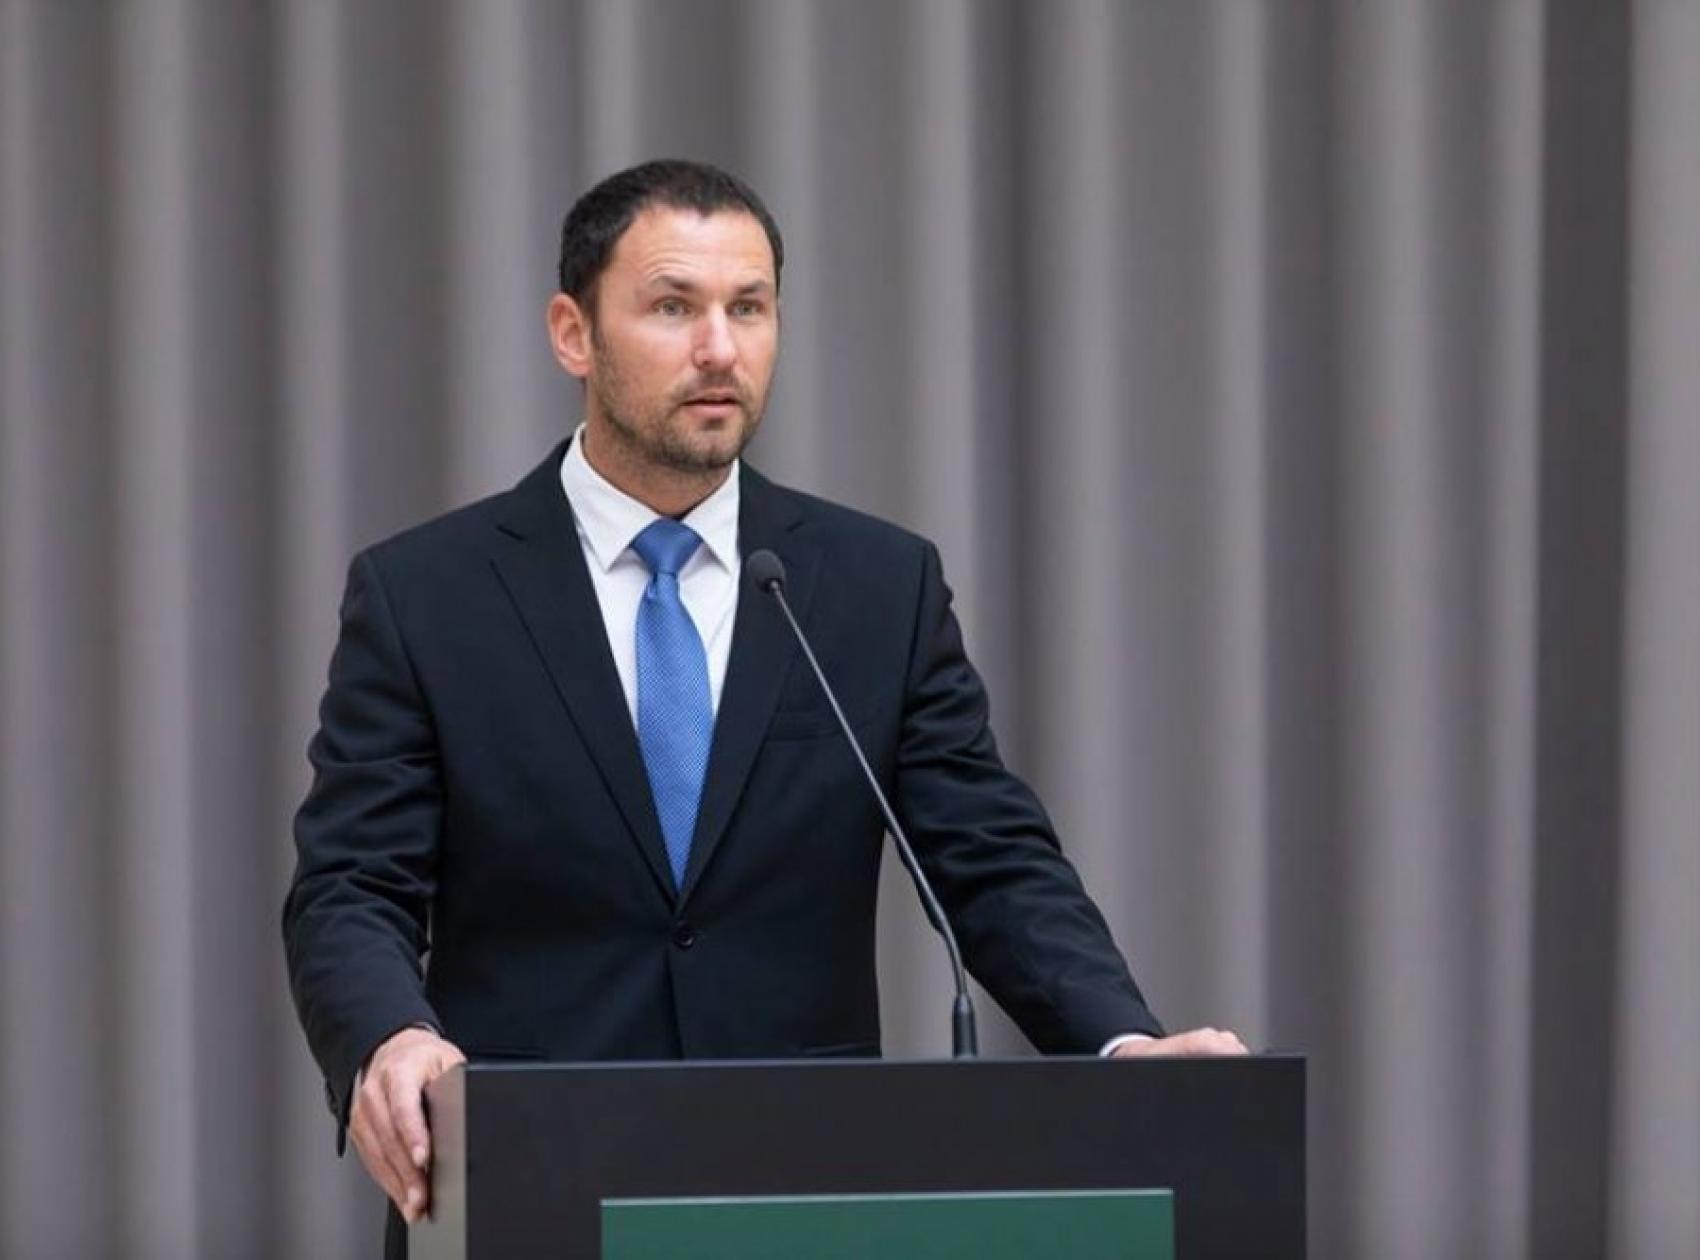 Slovenia is ready to share with Bulgaria its experience in